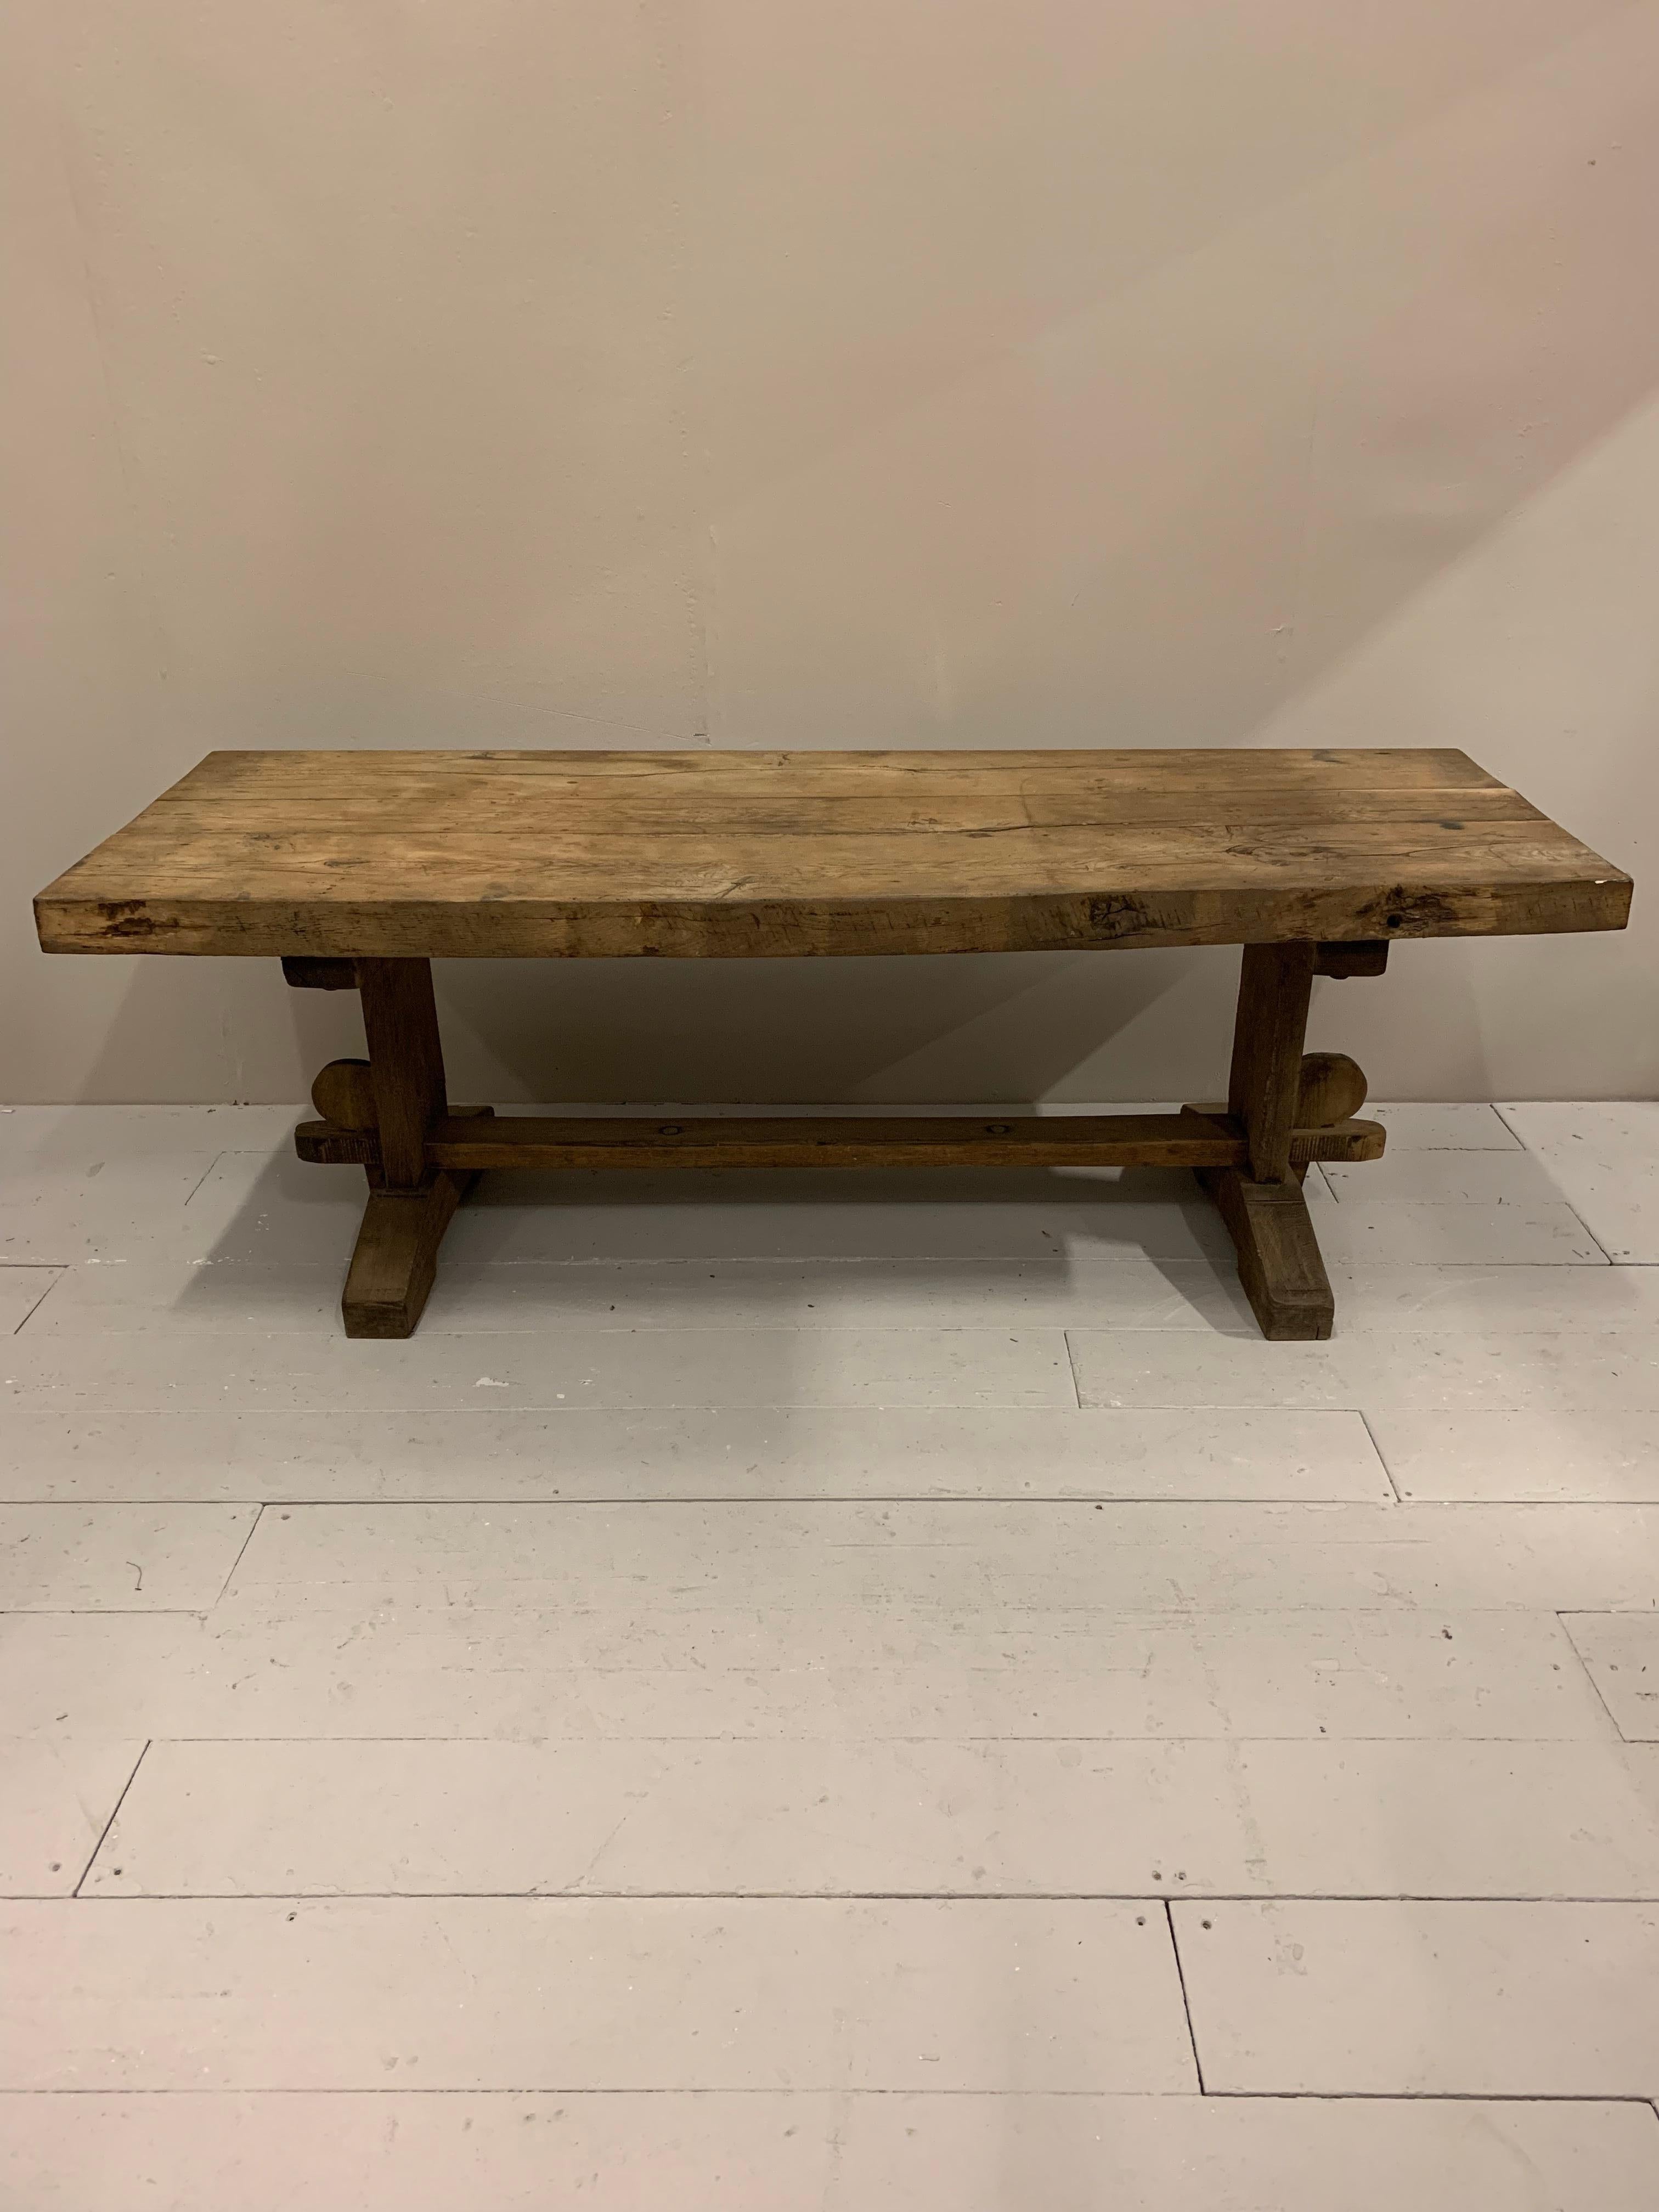 A midcentury 1950s rustic French planked oak farmhouse refectory table.
This wonderful table is made from oak that was originally used to make the wine barrels in the wine-growing Burgundy region of France. It has a substantial thick top which is 9